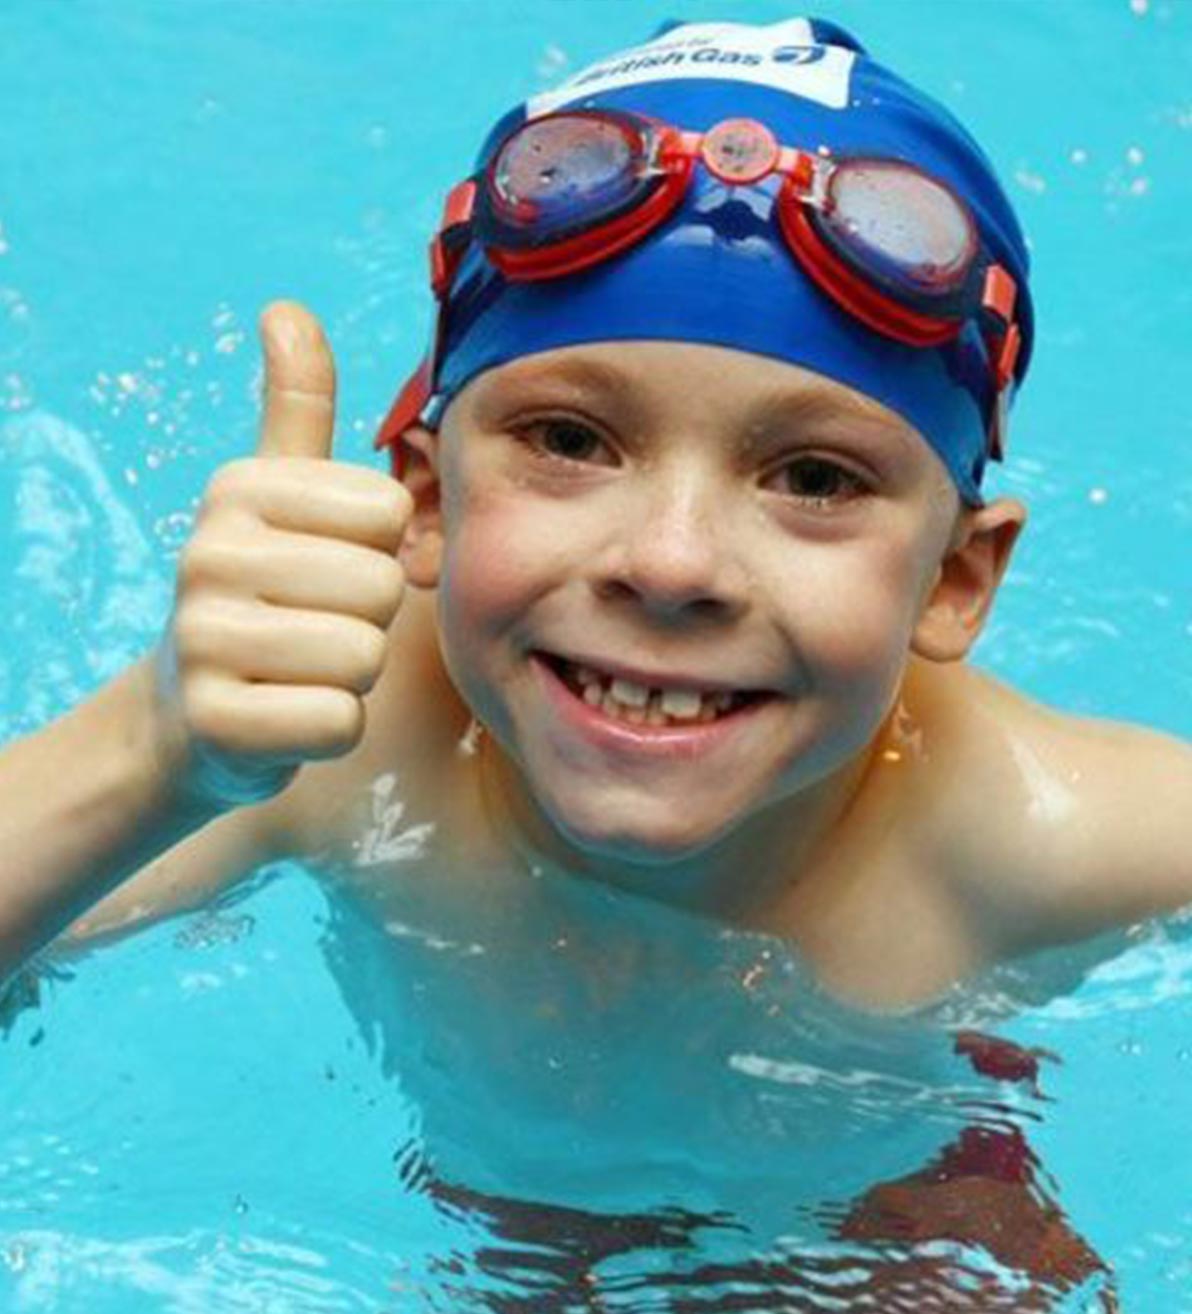 Boy In Pool With Swim Cap amd Goggles Doing the Thumbs Up Sign